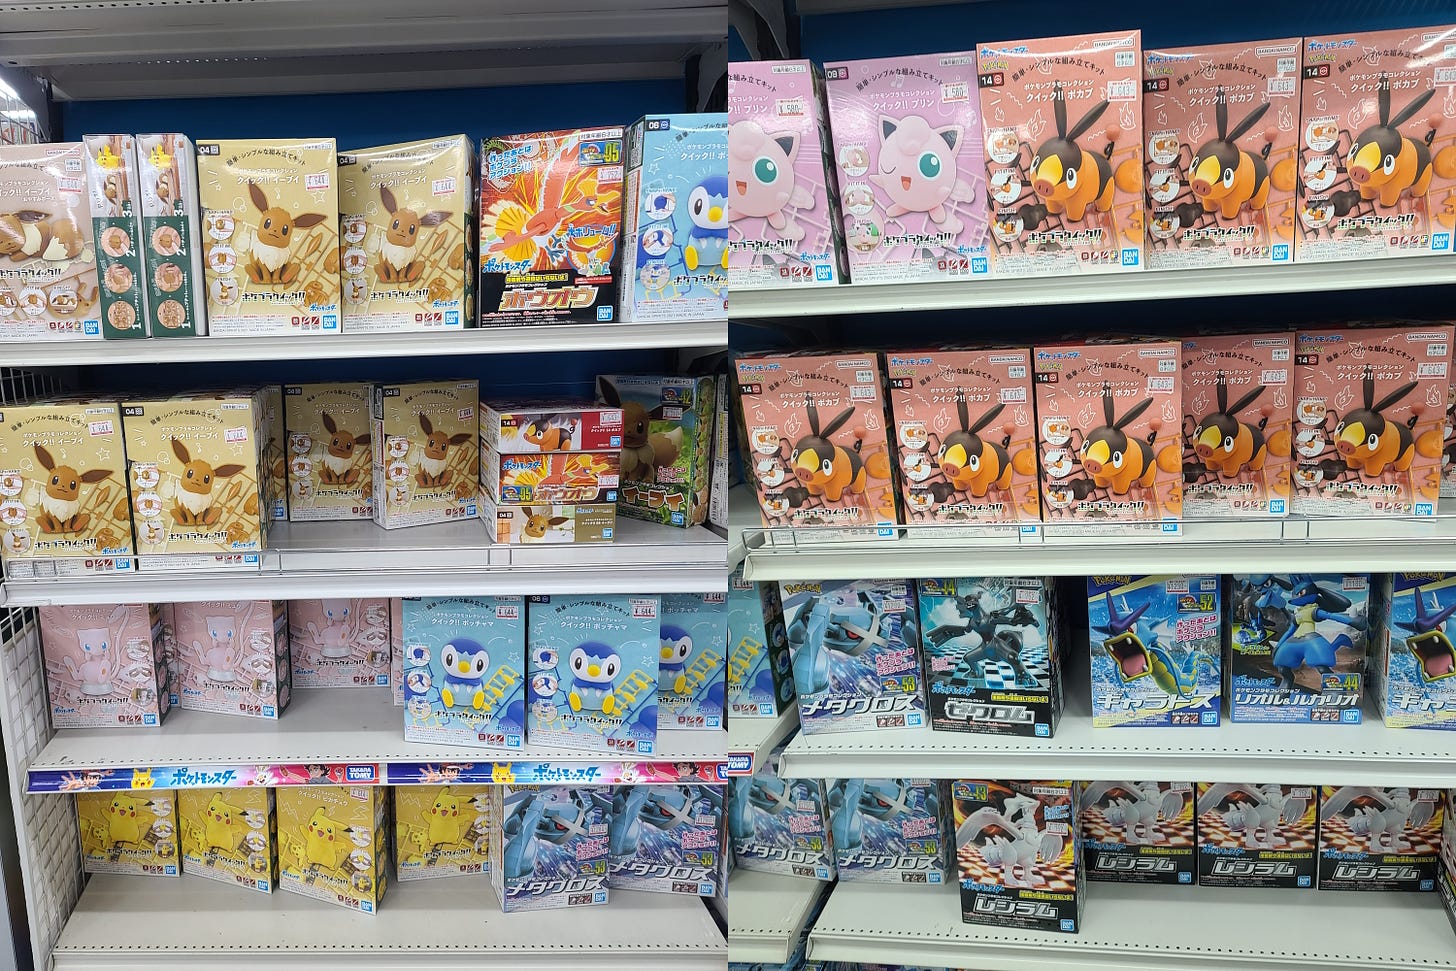 A huge selection of model building kits for Pokémon, found at the Yodobashi Camera Multimedia stores in Umeda